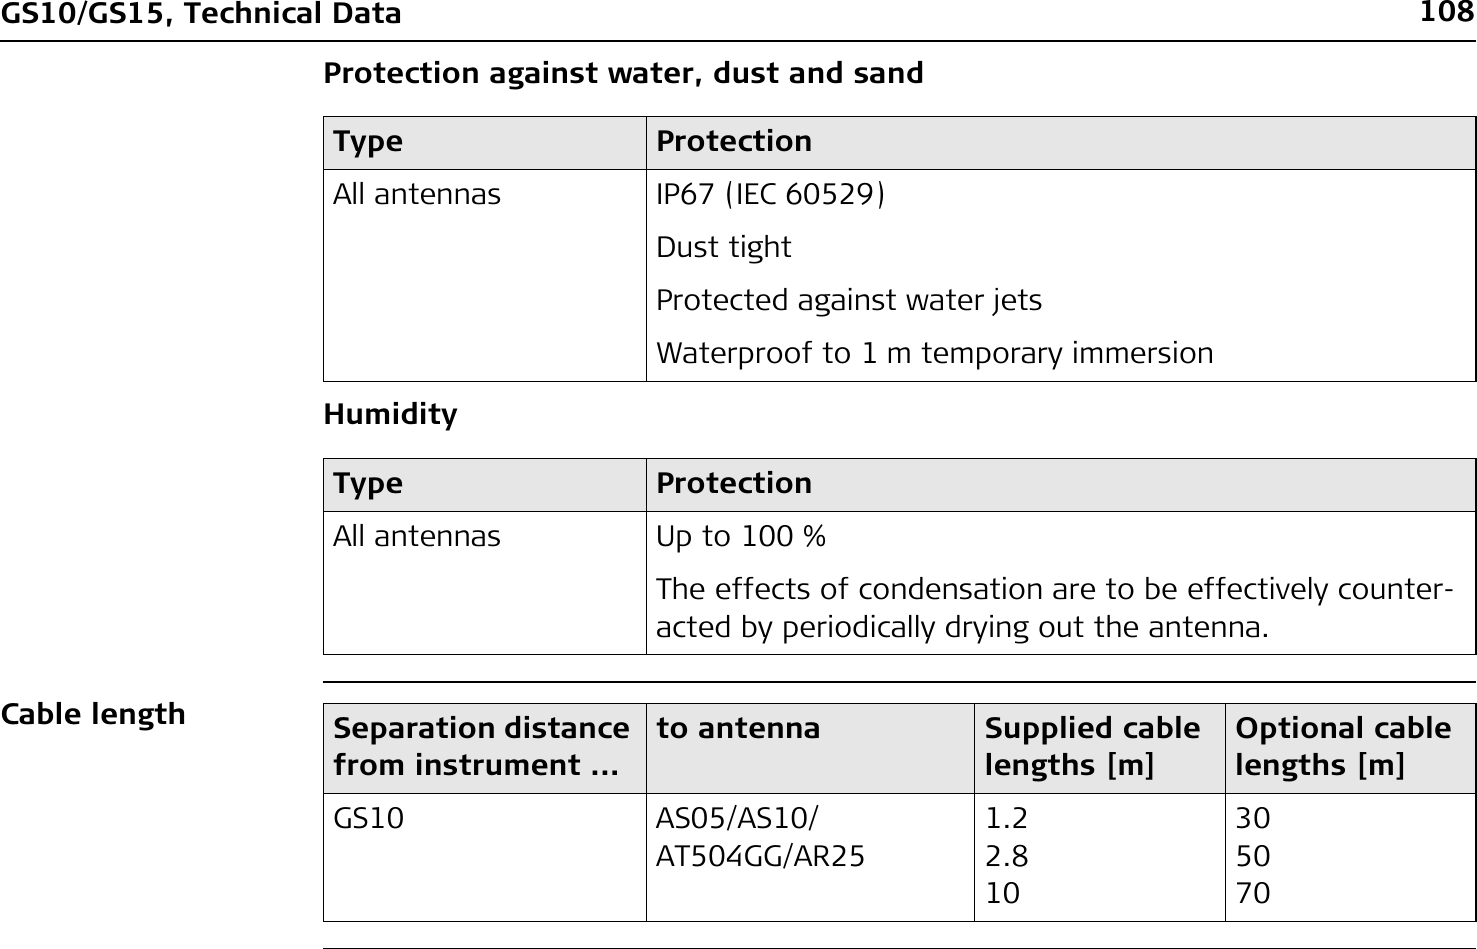 108GS10/GS15, Technical DataProtection against water, dust and sandHumidityCable lengthType ProtectionAll antennas IP67 (IEC 60529)Dust tightProtected against water jetsWaterproof to 1 m temporary immersionType ProtectionAll antennas Up to 100 %The effects of condensation are to be effectively counter-acted by periodically drying out the antenna.Separation distance from instrument ...to antenna Supplied cable lengths [m]Optional cable lengths [m]GS10 AS05/AS10/AT504GG/AR251.22.810305070